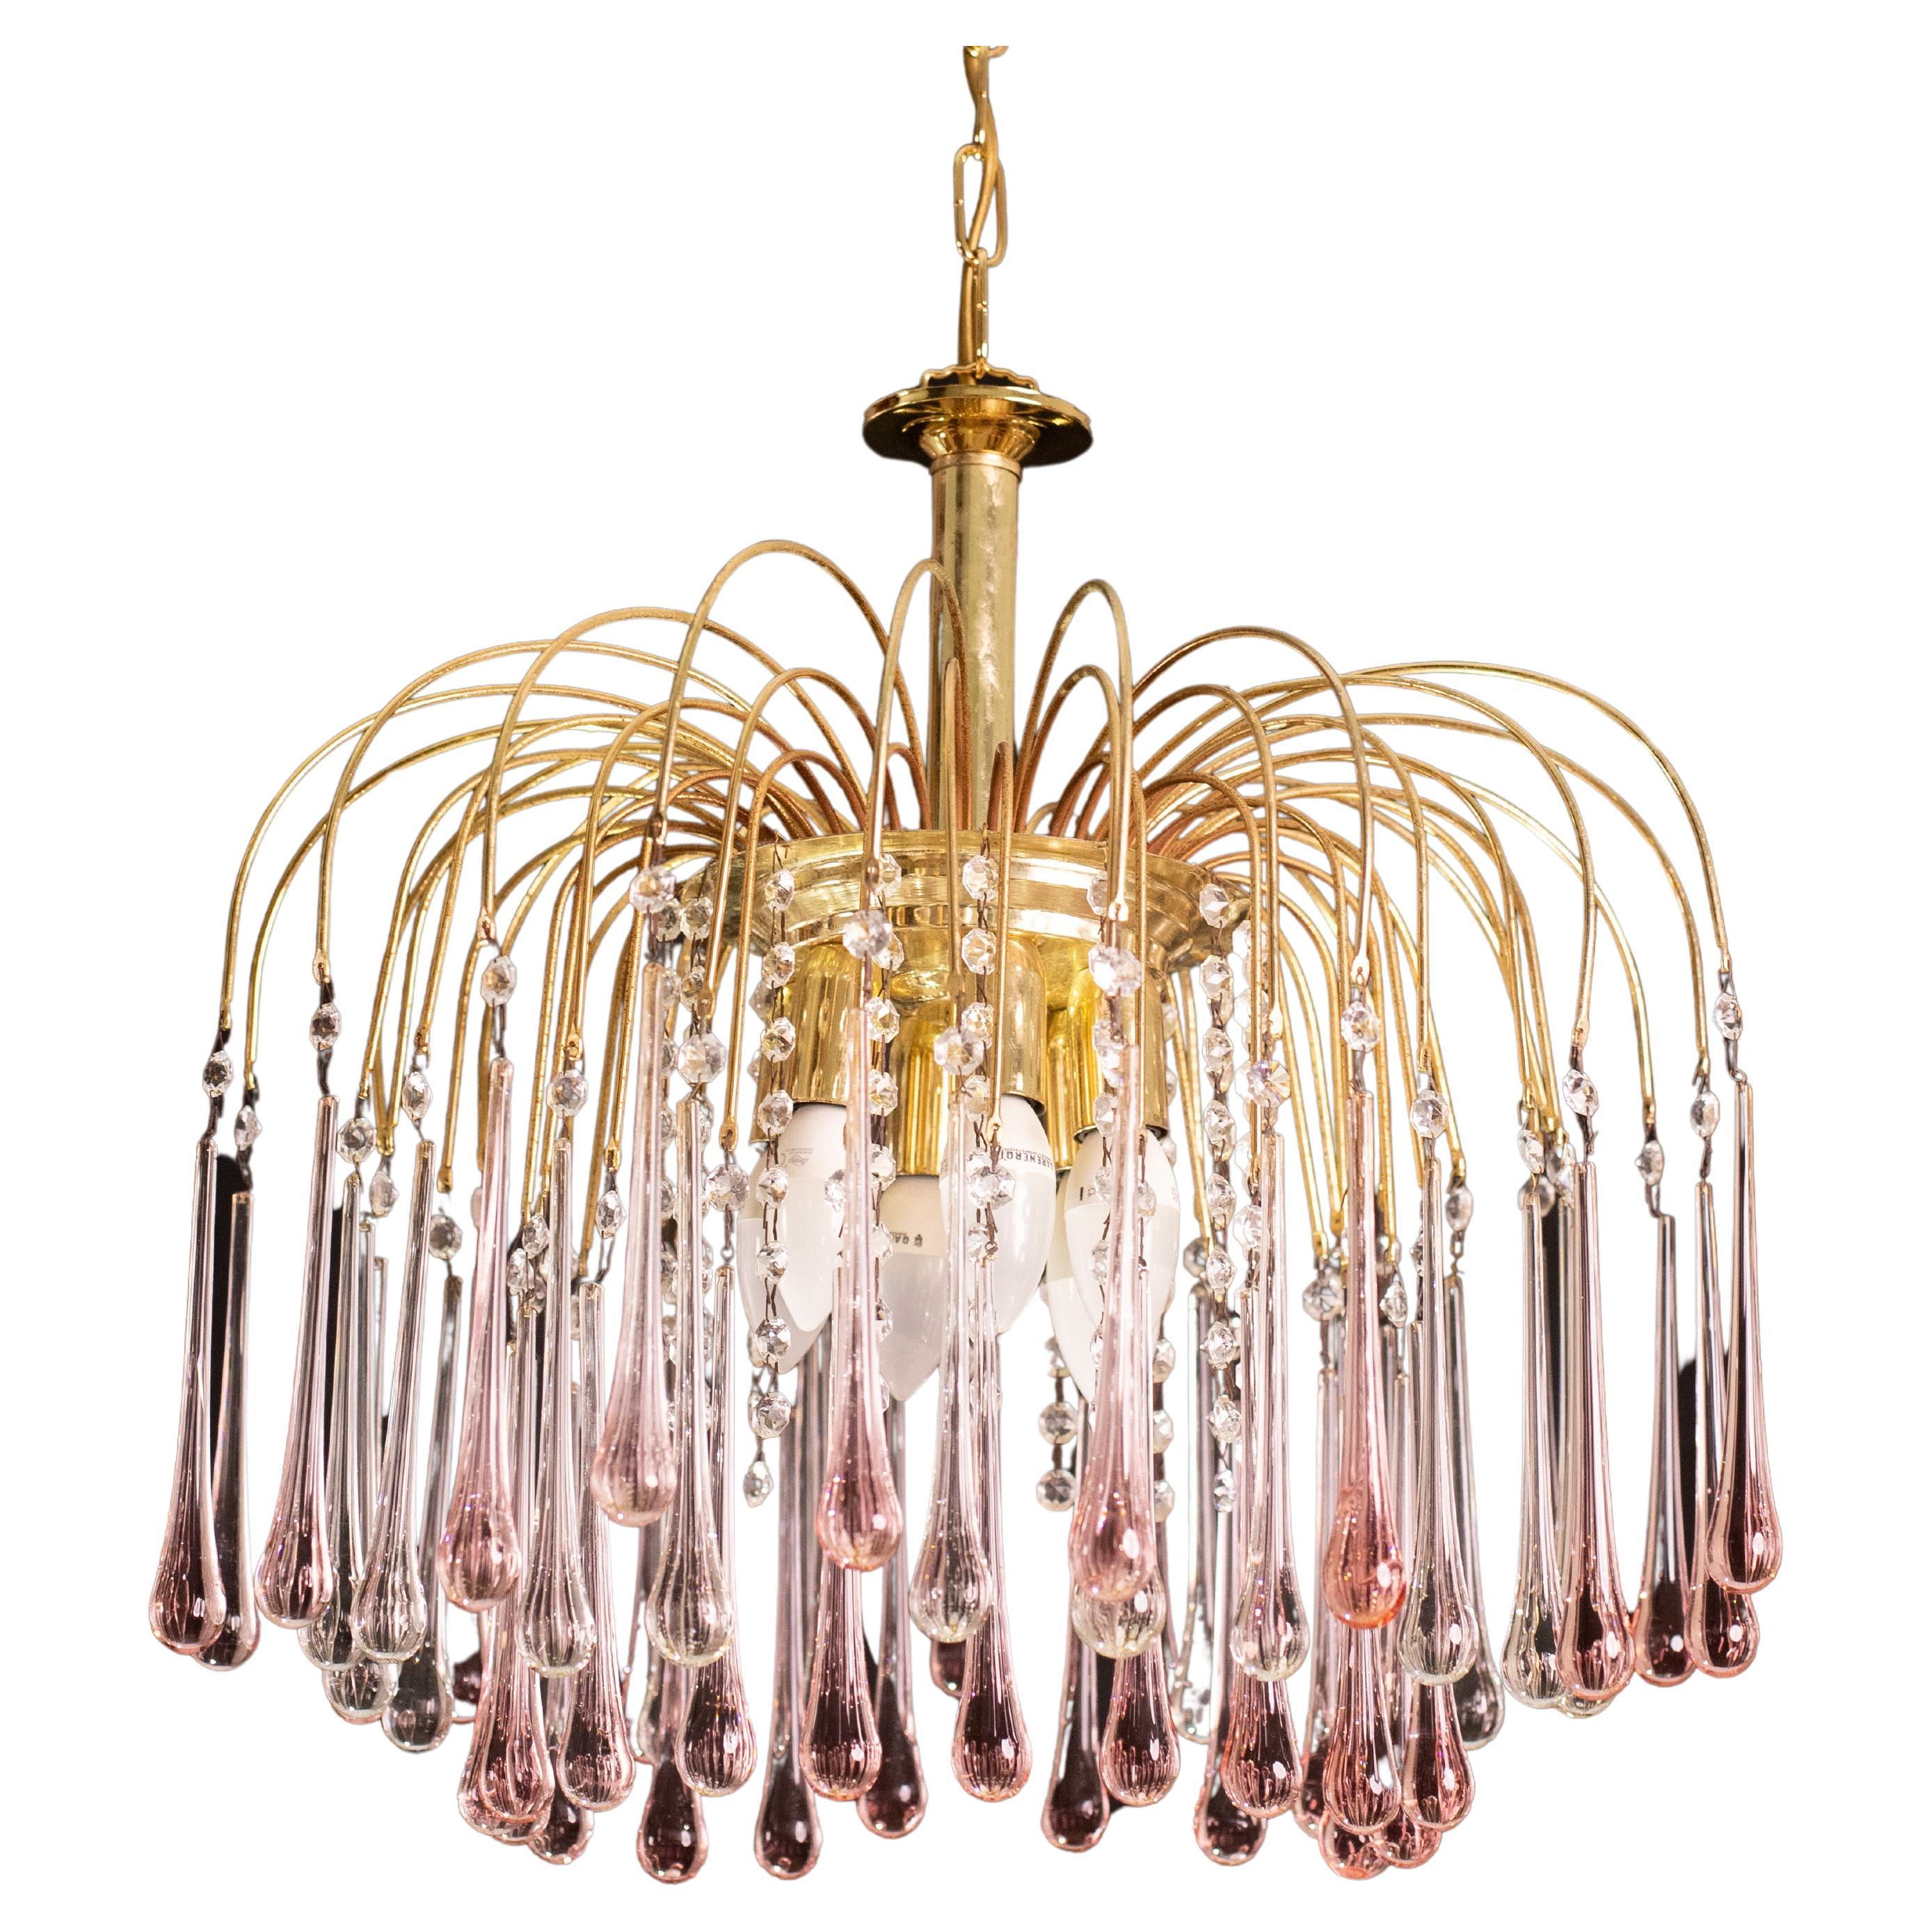 Lady Barbara, Murano Chandelier Pink and White Drops, Venini Style, 1970s For Sale